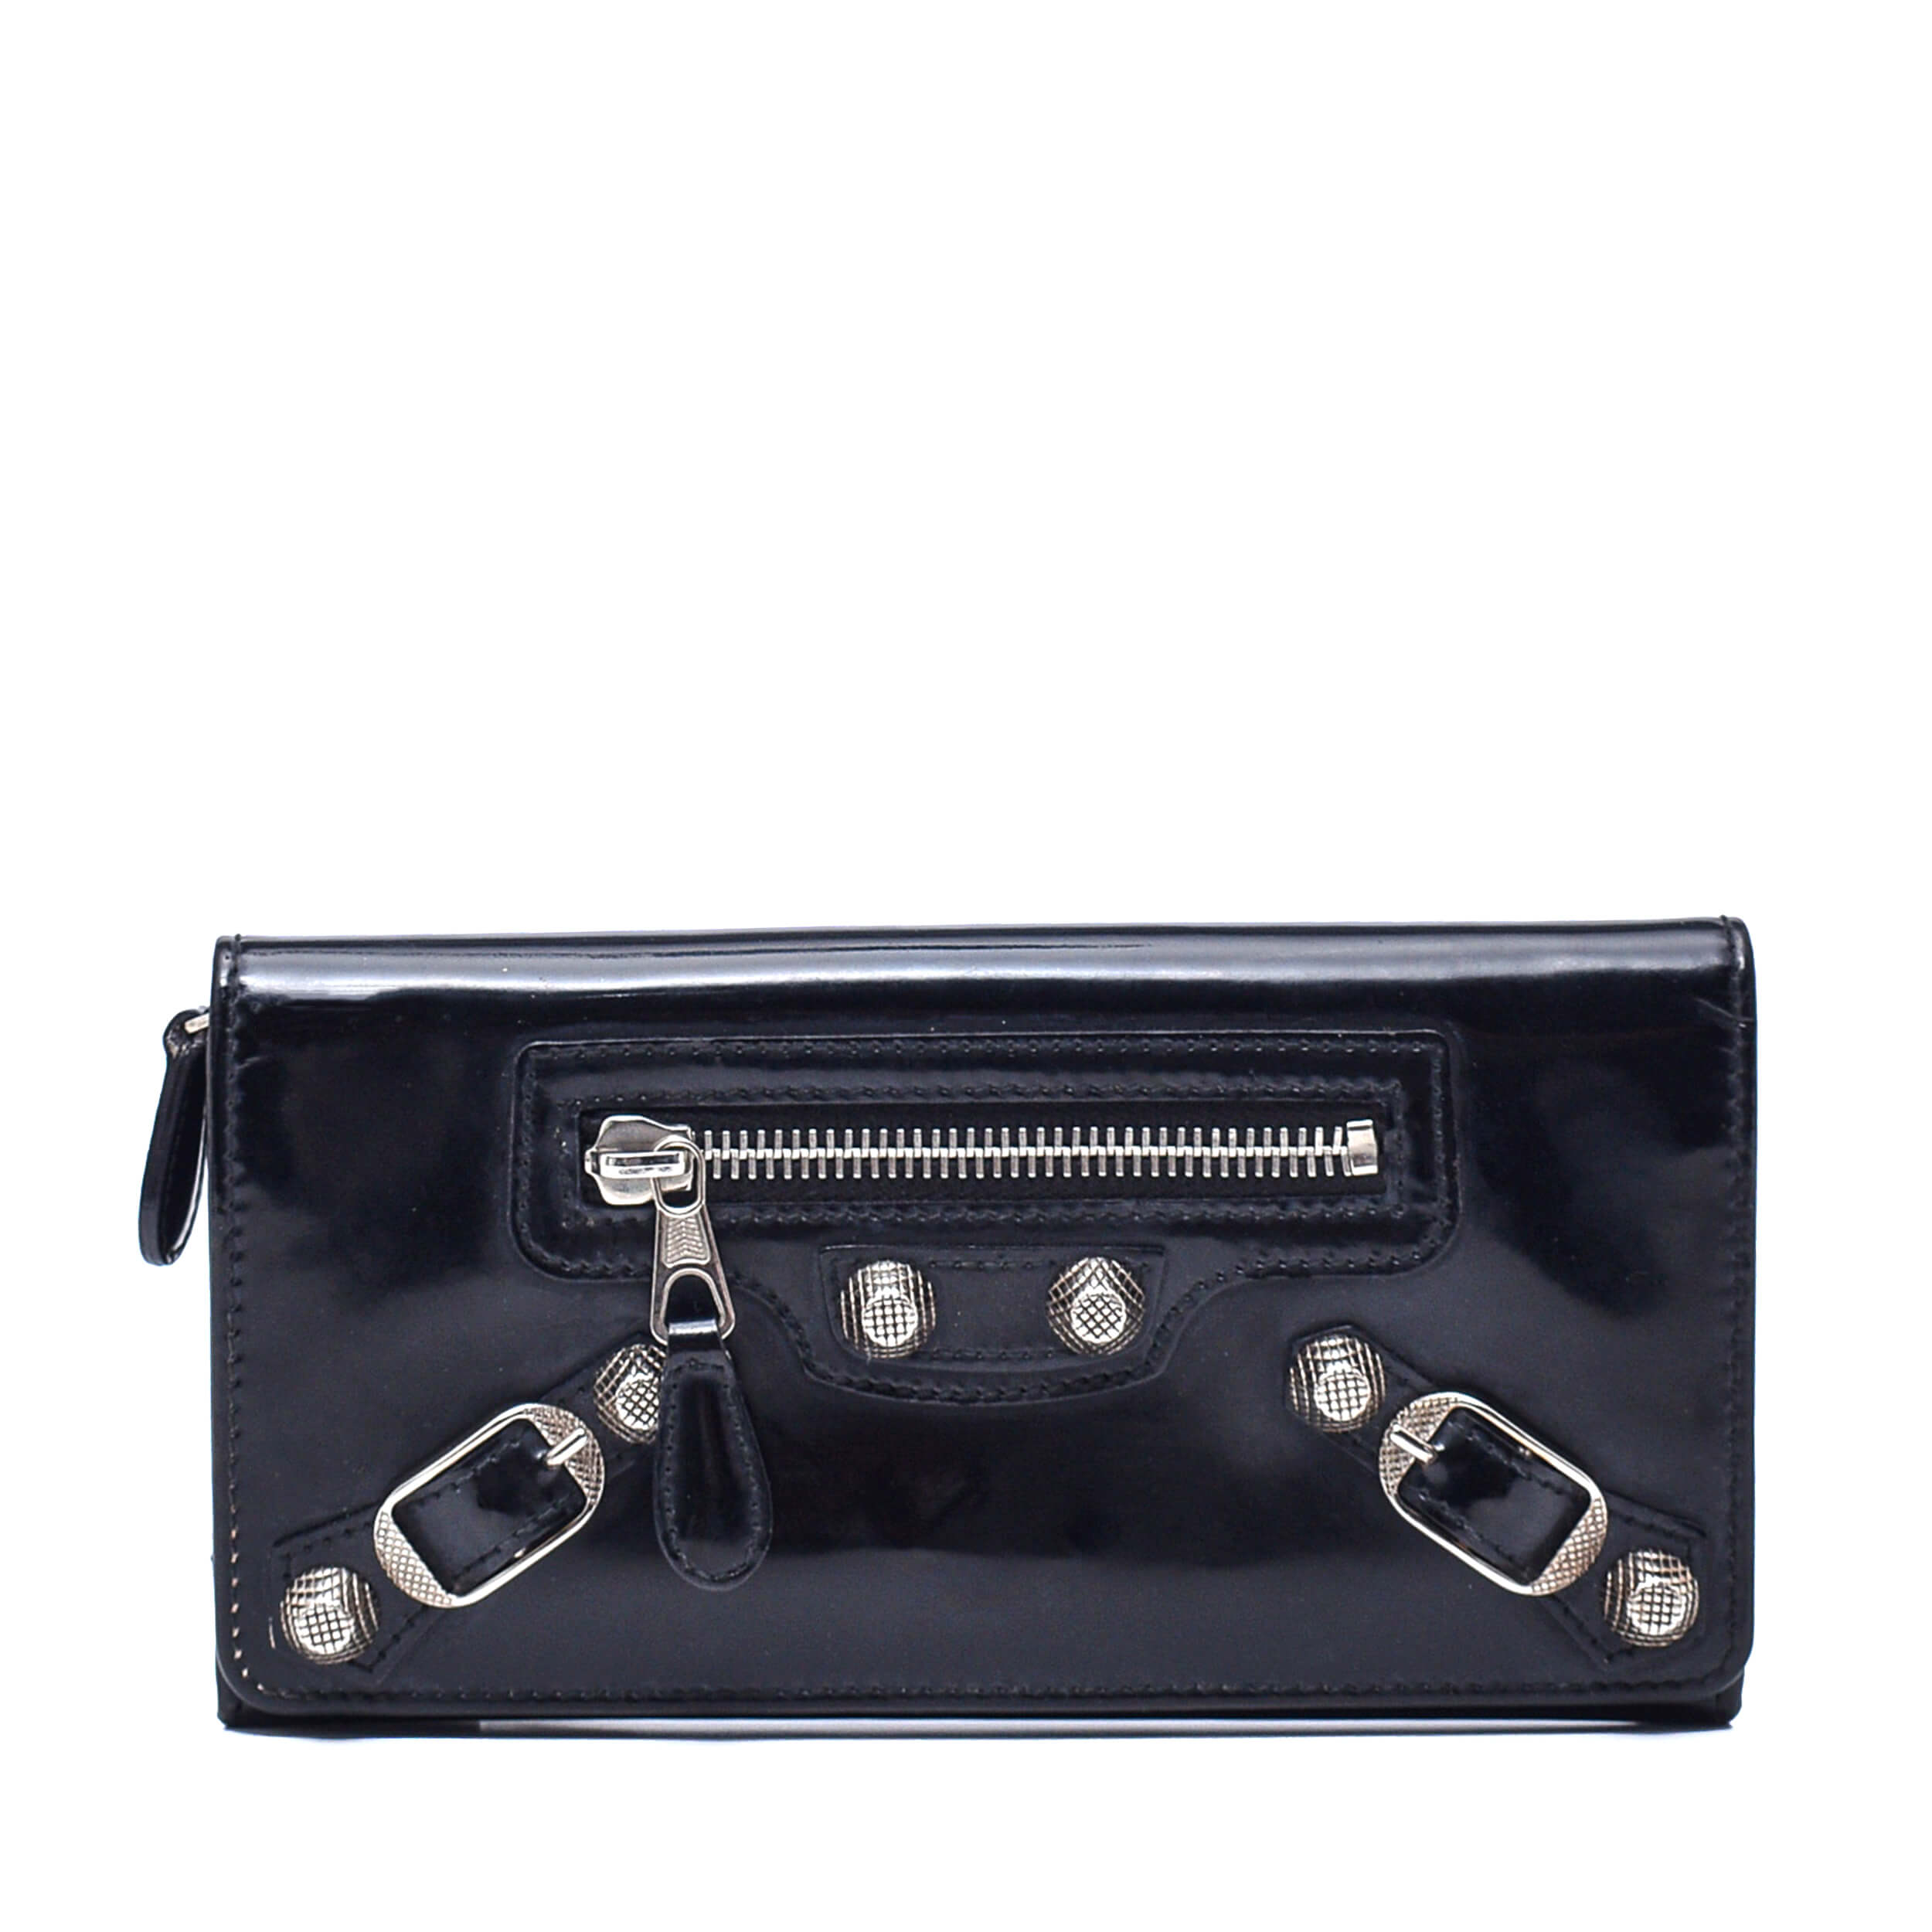 Balenciaga - Black Smooth Patent Leather Motorcycle Wallet